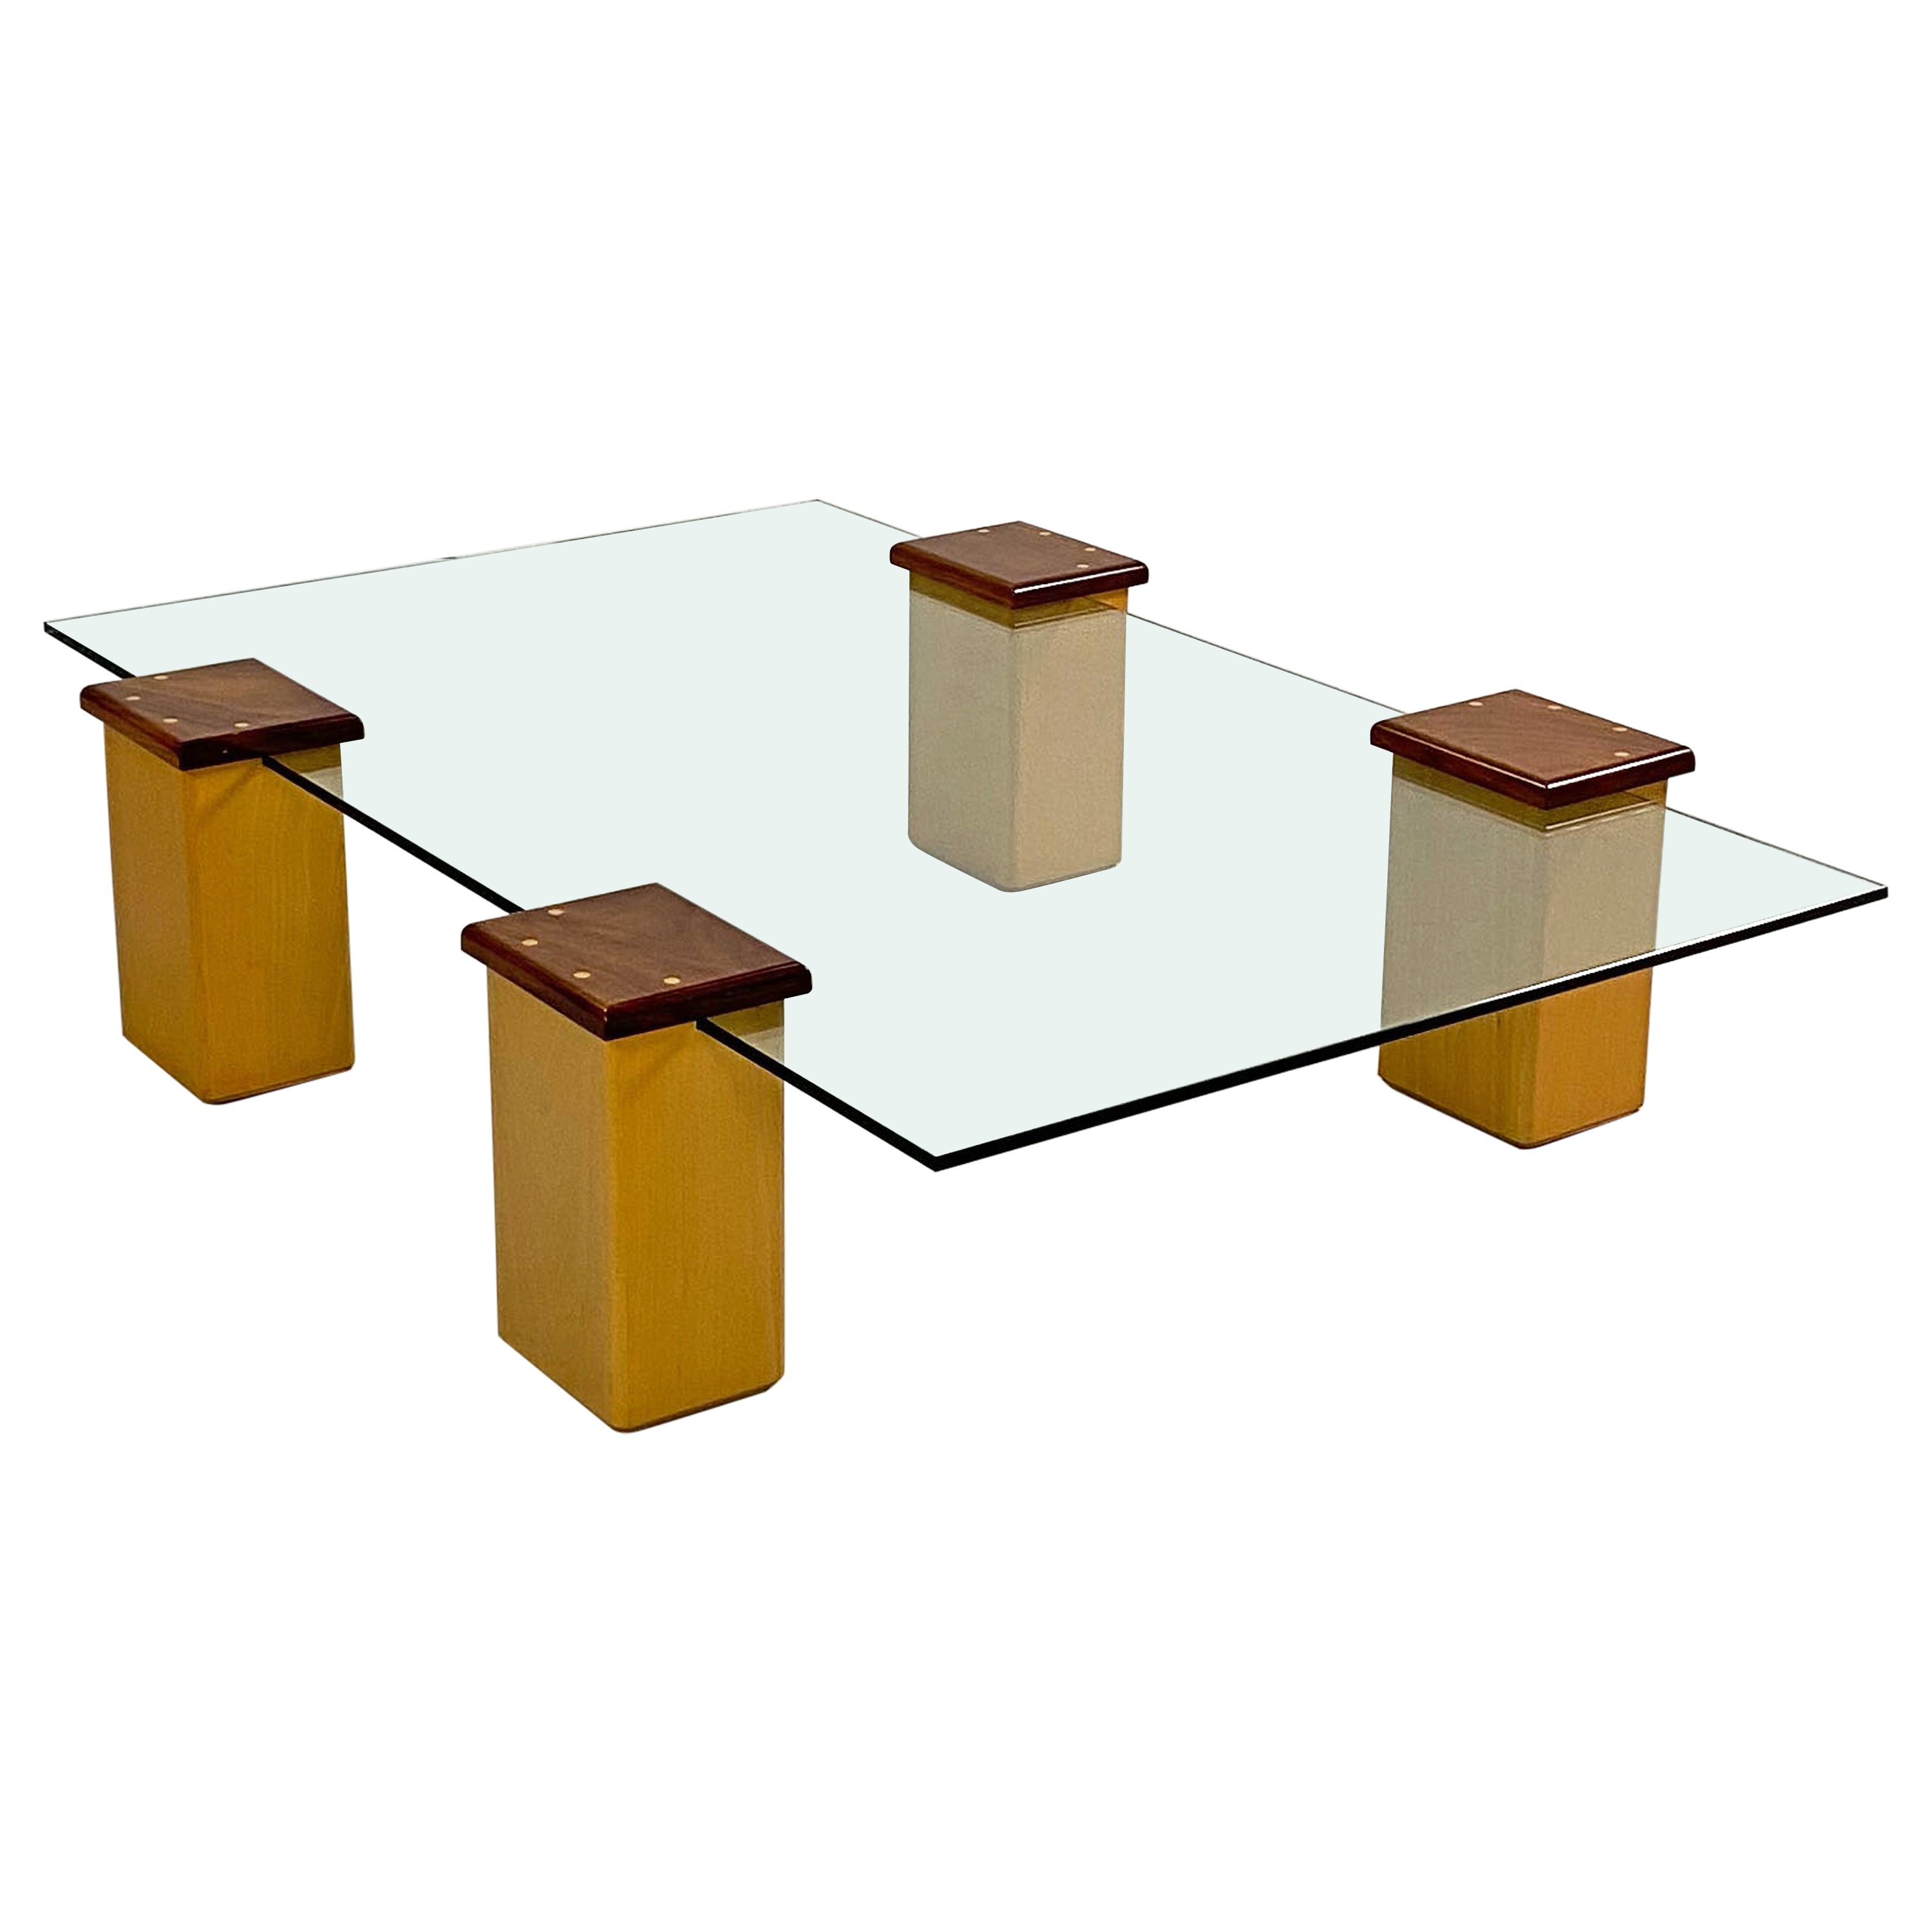 Custom made Postmodern coffee table. An usual design composed of 4 beech pillars with cherry wood tops that slot on to the glass table top allowing for a variety of configurations.
 